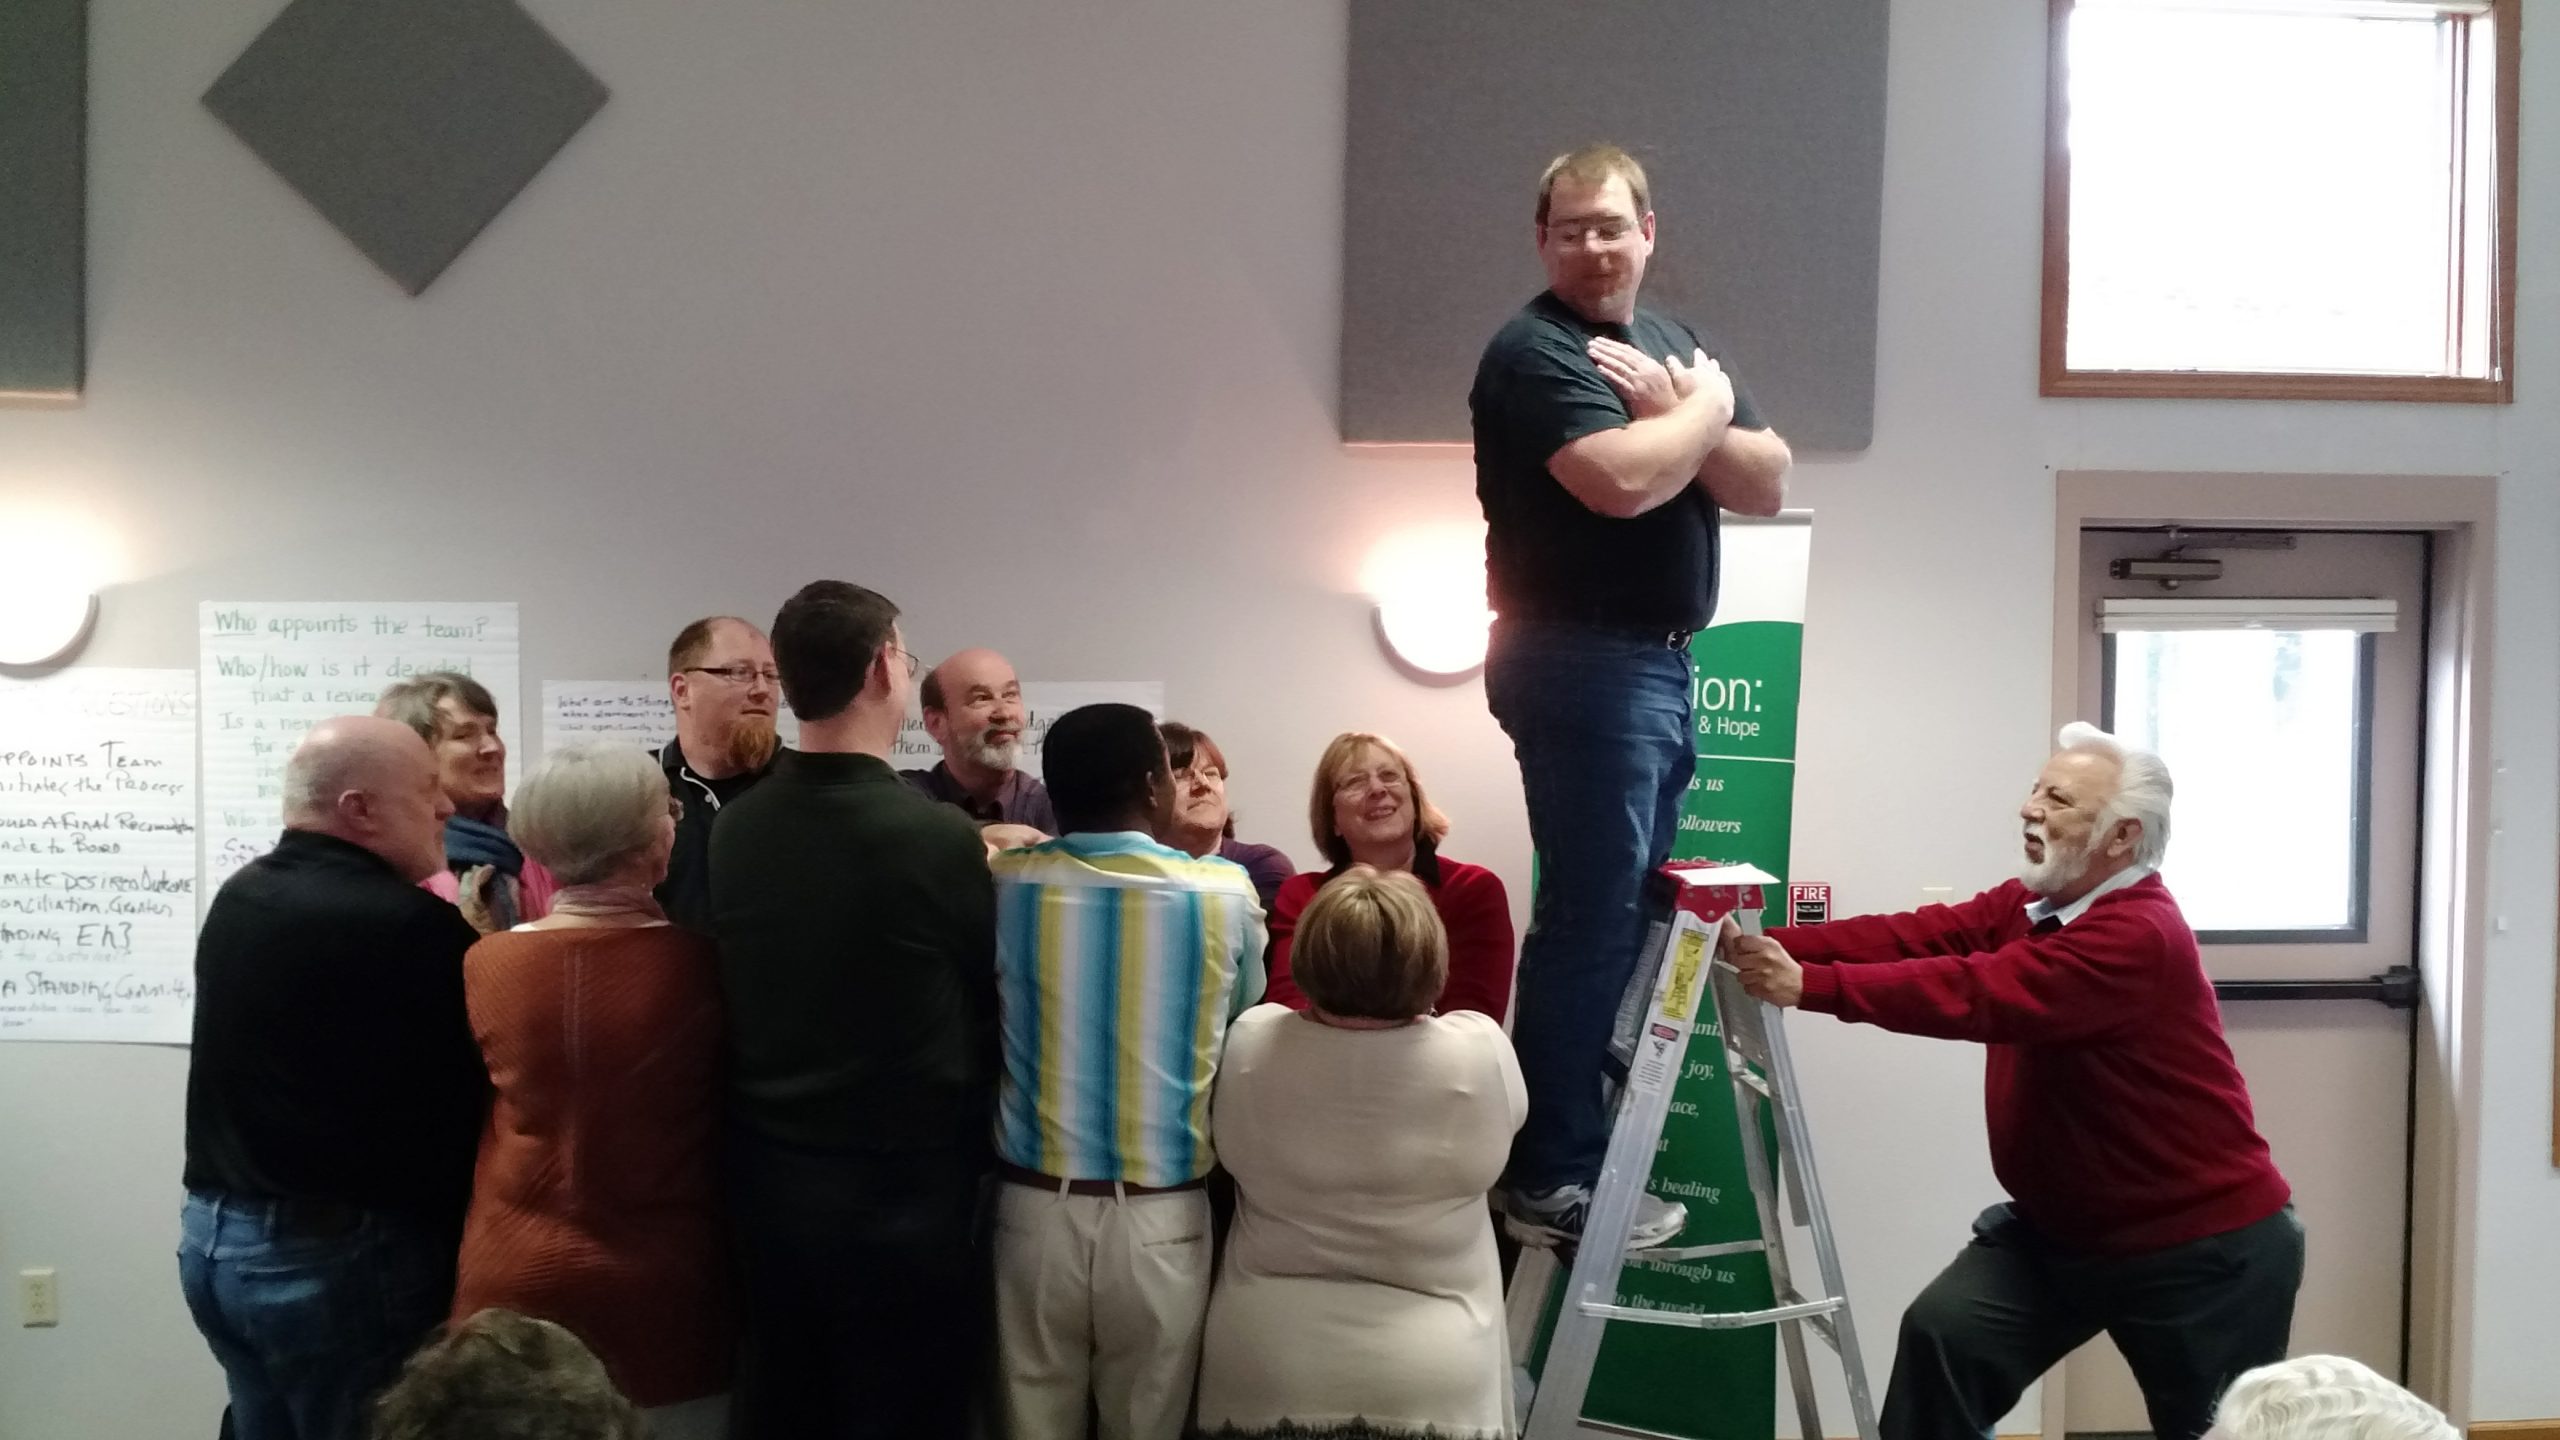 Rodger Schmell, representing Eastern District Conference, prepares for a “trust fall” into the arms of fellow Constituency Leaders Council (CLC) members representing multiple theological perspectives across the denomination during the CLC’s March 2016 meeting. Lupe Aguilar, representing South Central Mennonite Conference, holds the ladder. (Photo by Janie Beck Kreider)